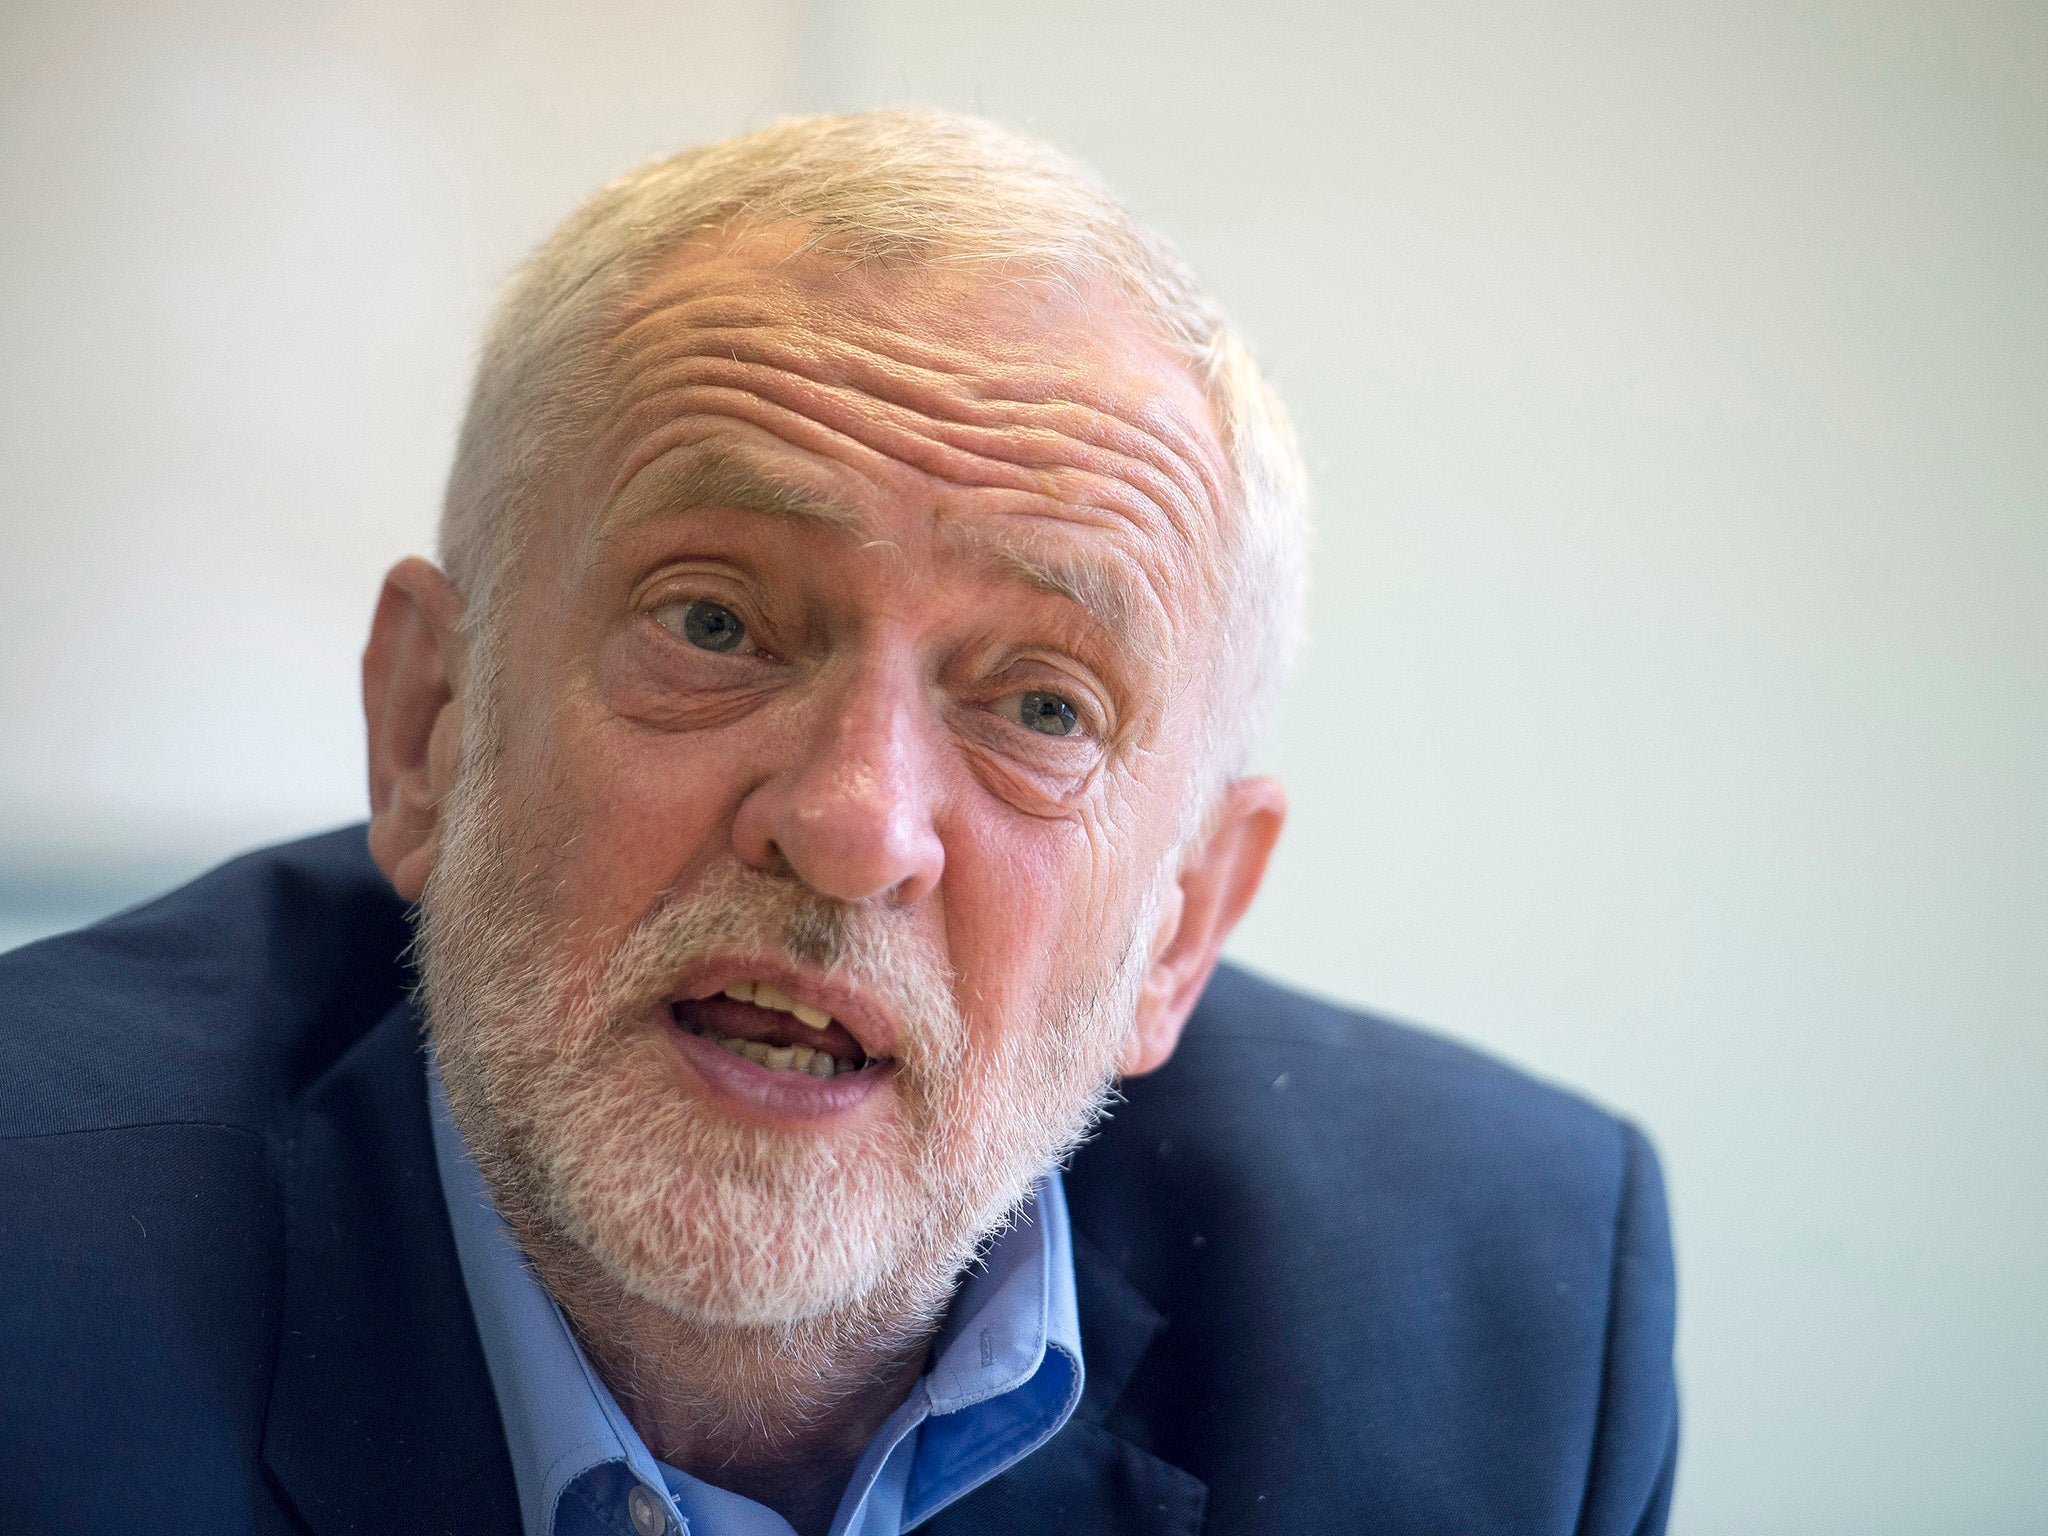 Jeremy Corbyn warns Theresa May she &apos;cannot stay silent&apos; over Donald Trump&apos;s Charlottesville response